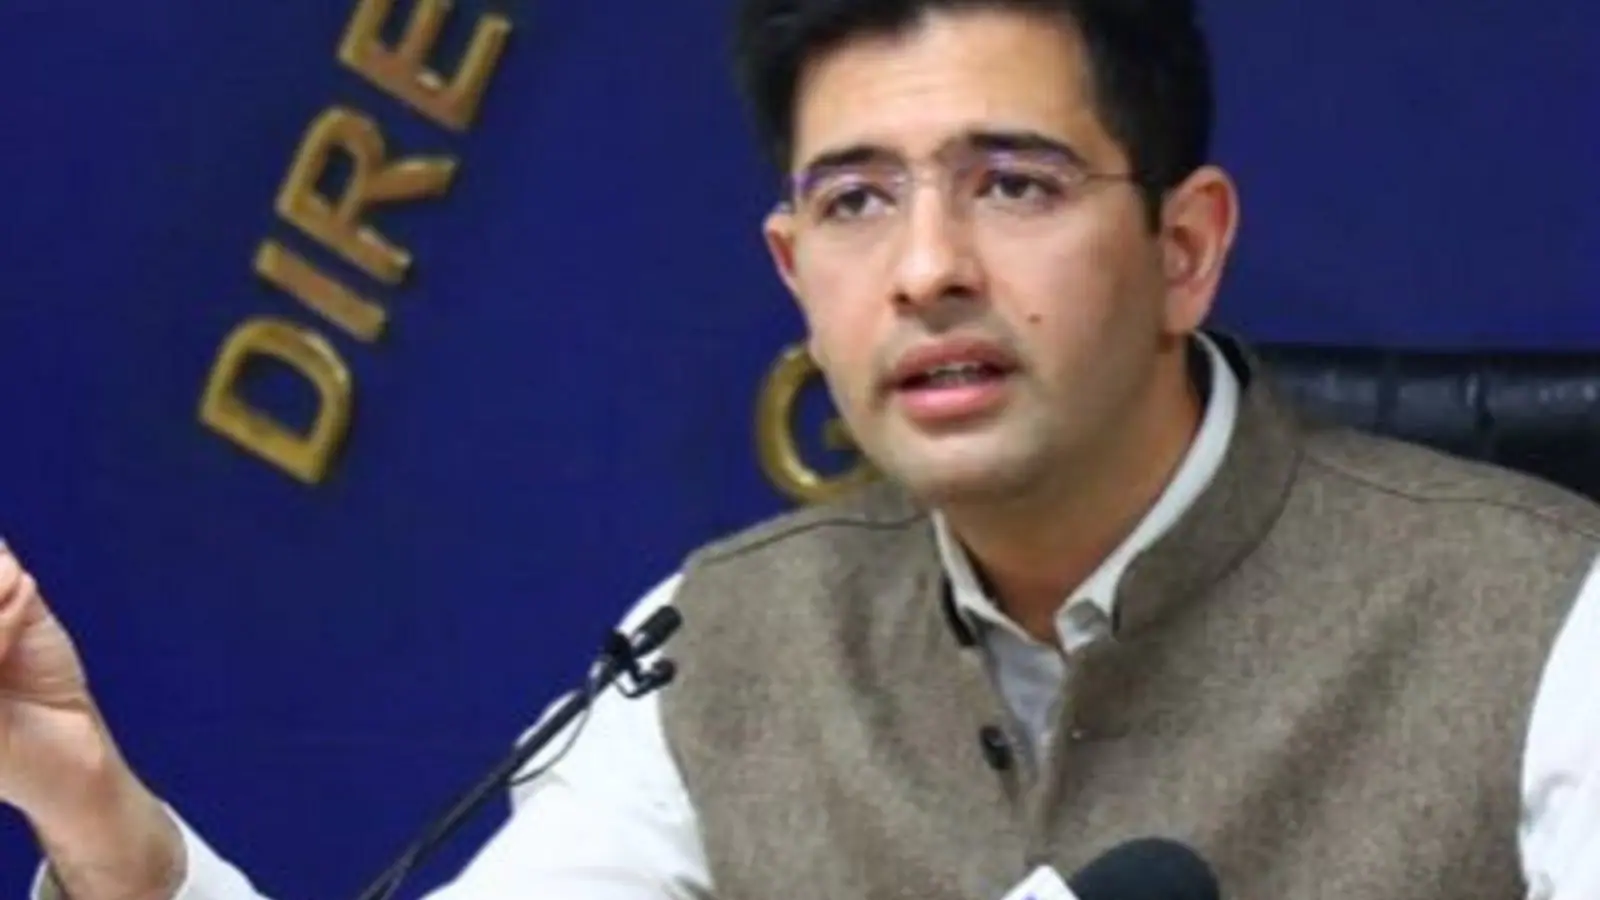 Punjab Elections 2022: Don’t Vote for Parties Which are Not Even in Contest, Says AAP’s Raghav Chadha